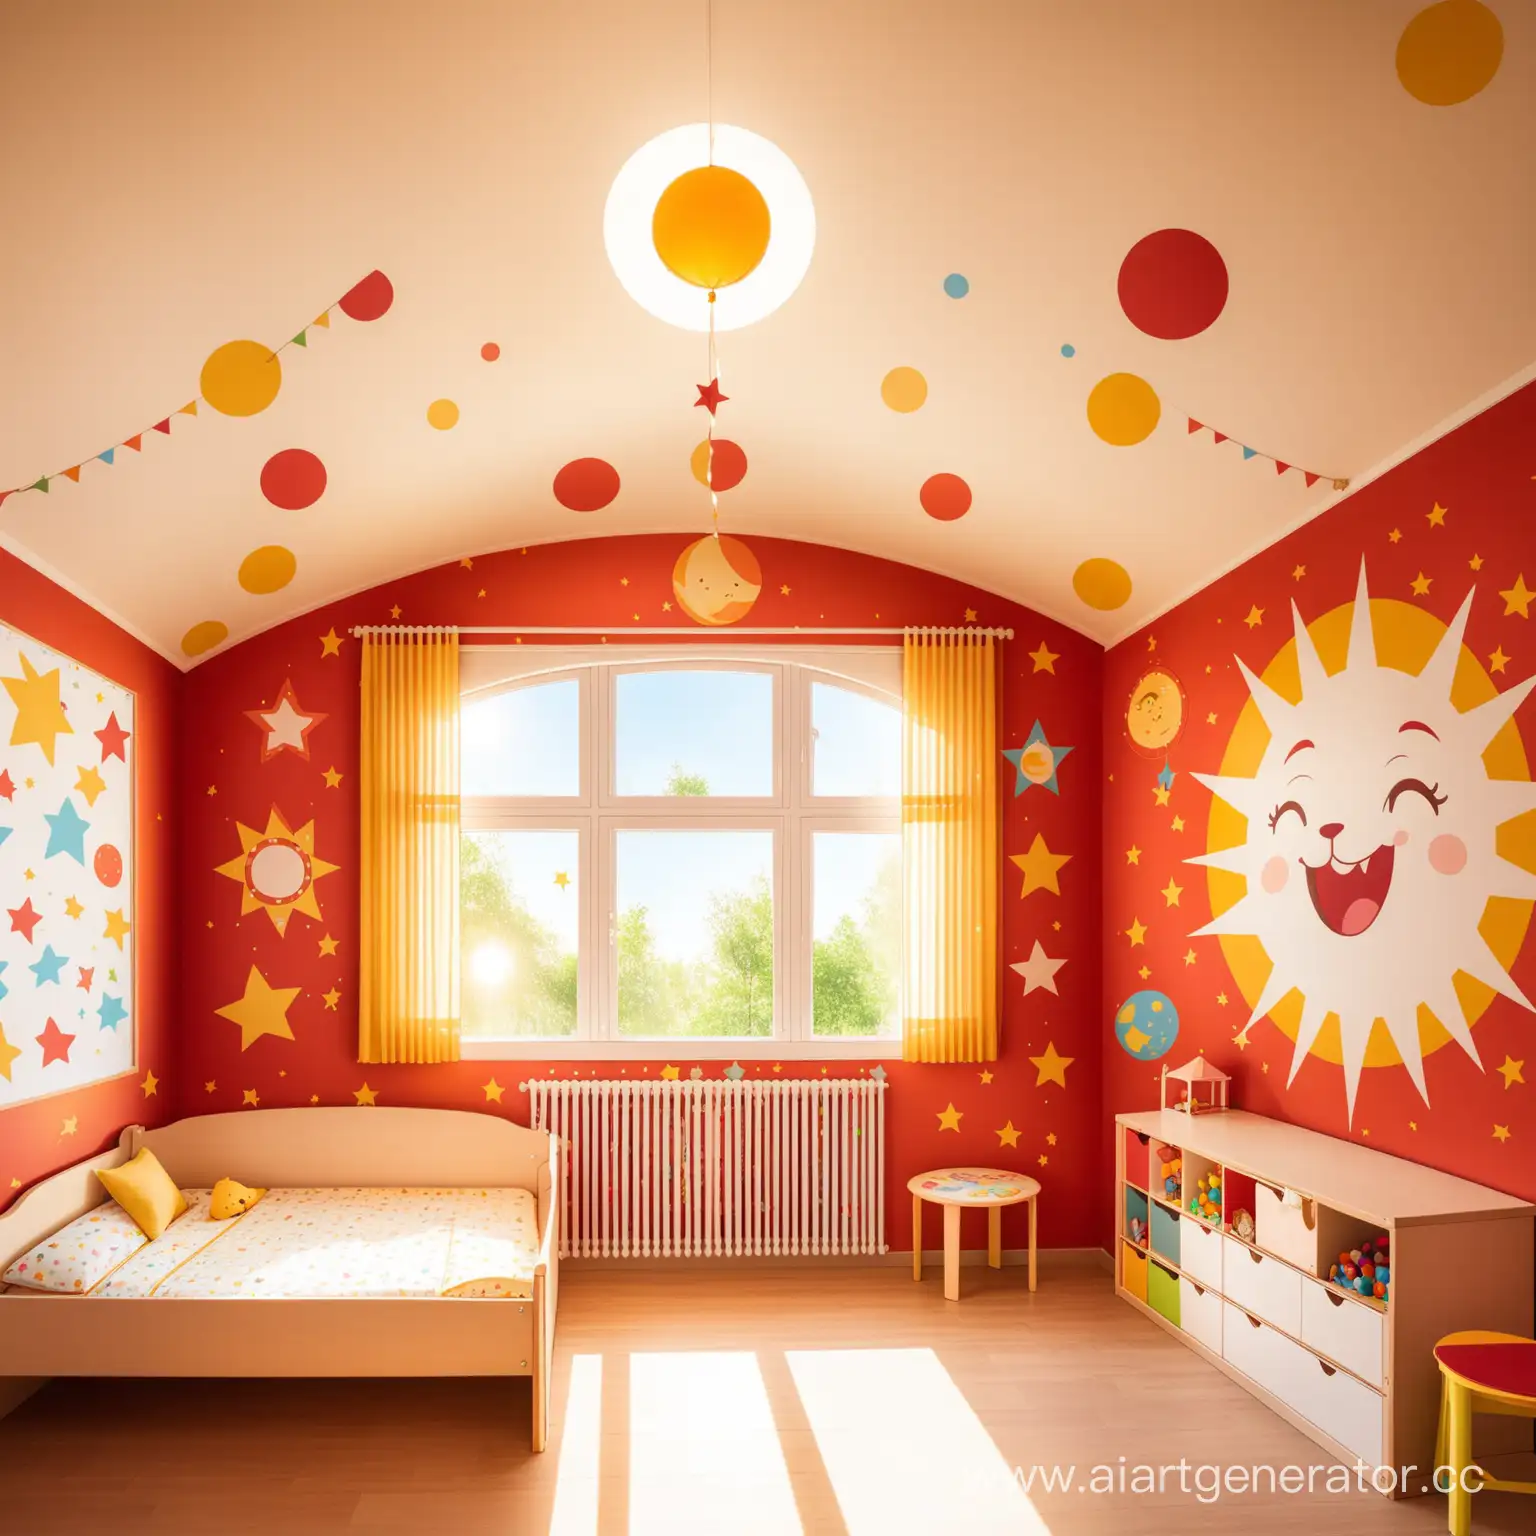 Childs-Room-with-Circus-Decorations-and-Sun-Drawings